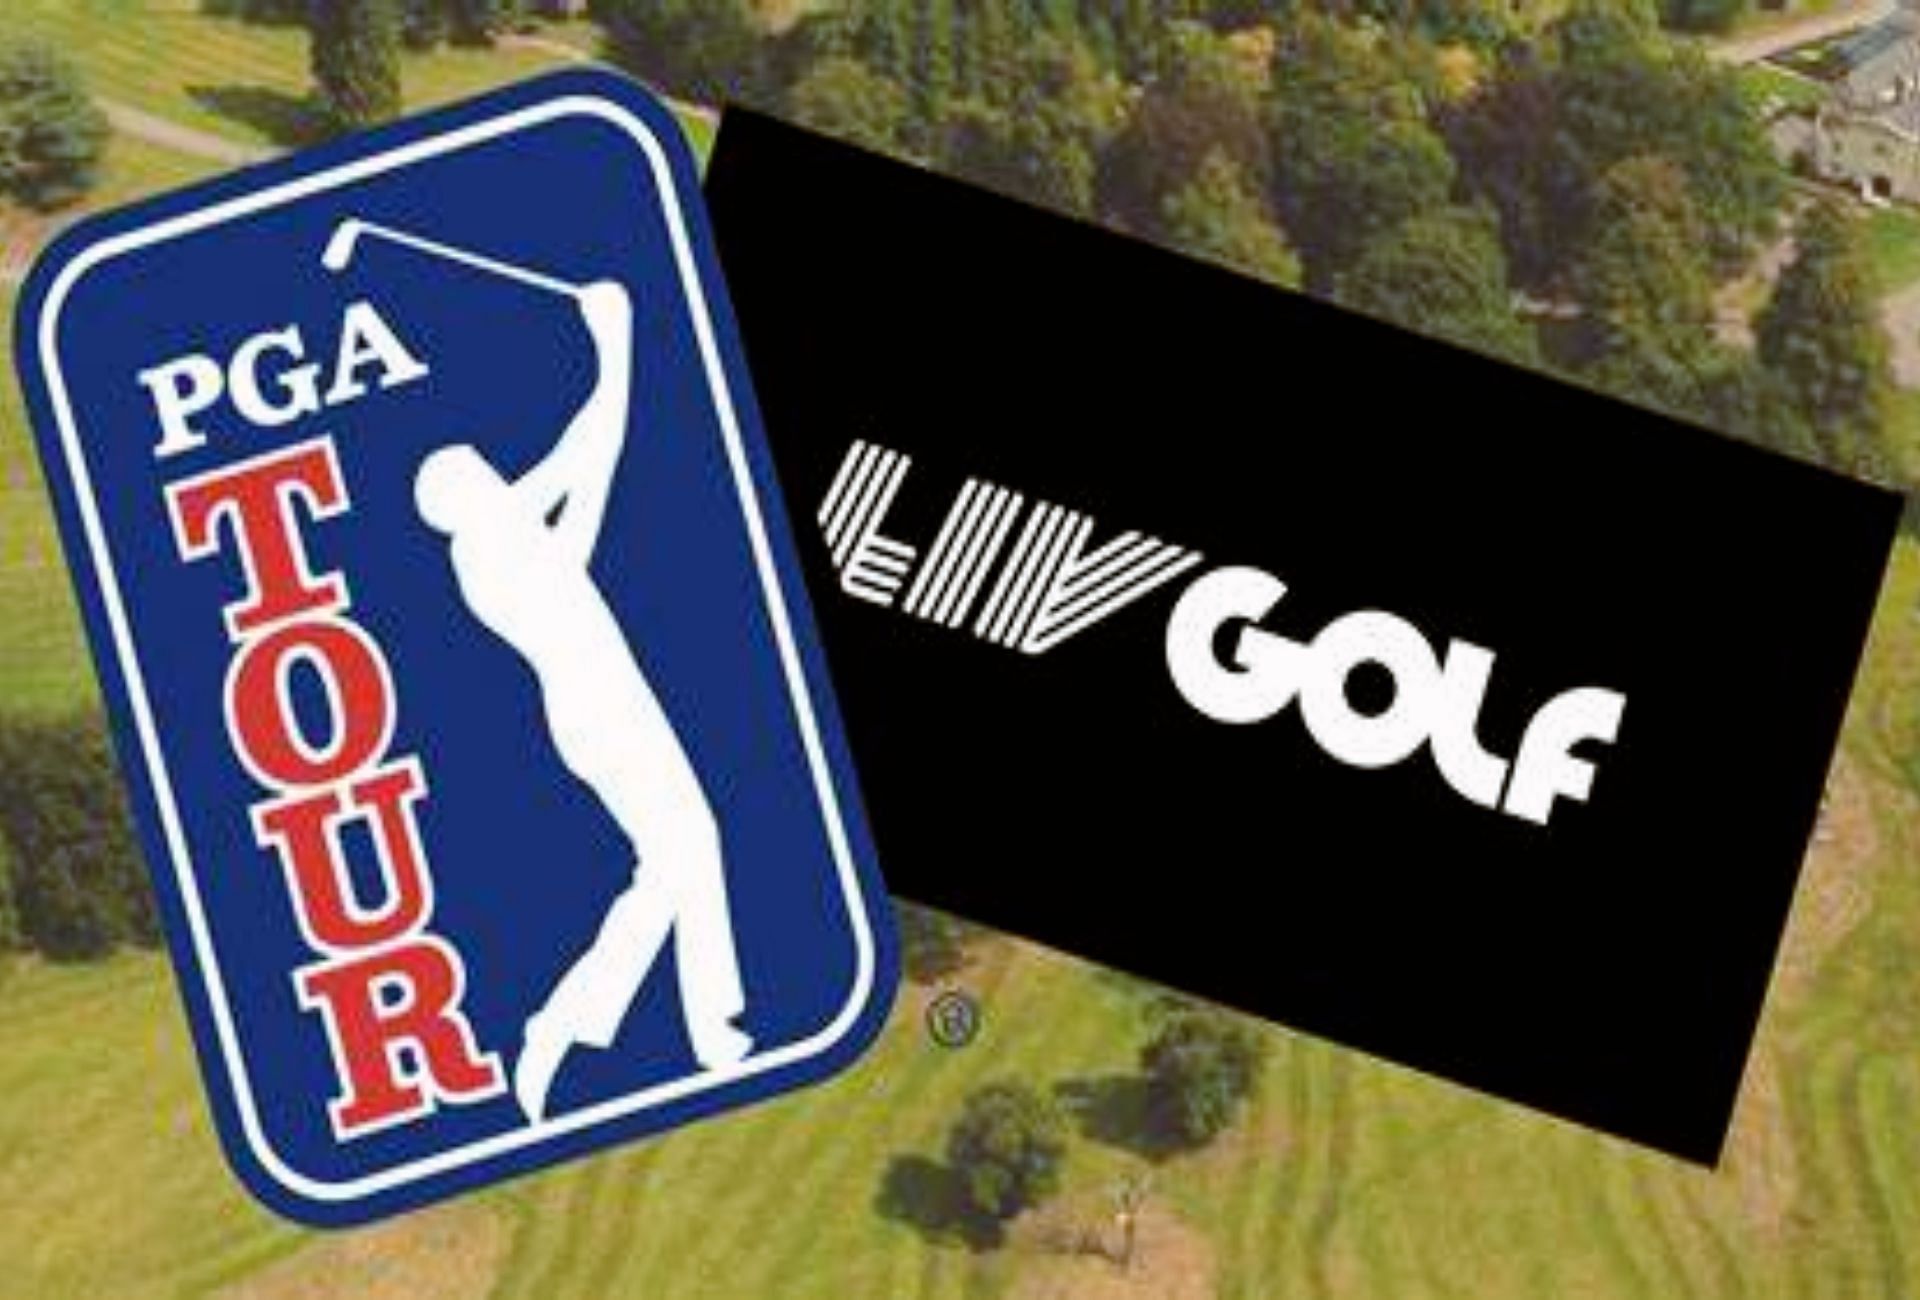 The framework agreement between LIV Golf and the PGA Tour may be in jeopardy (Image via compleatgolfer.com).